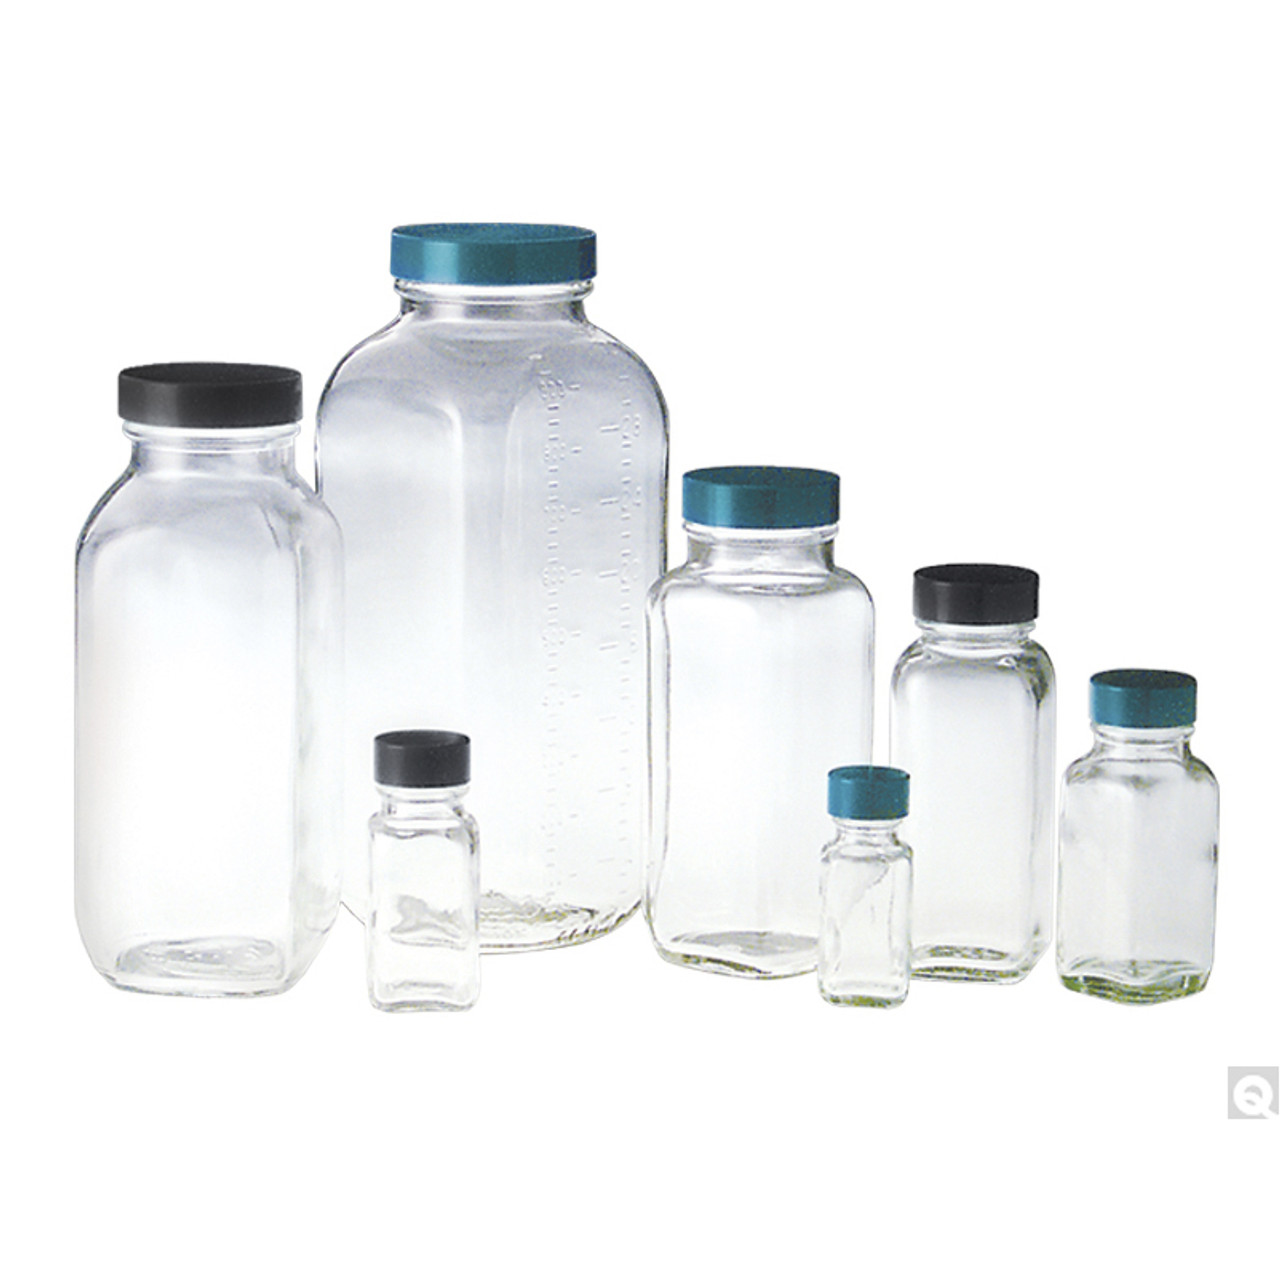 240ml Square Glass Jars With Lids